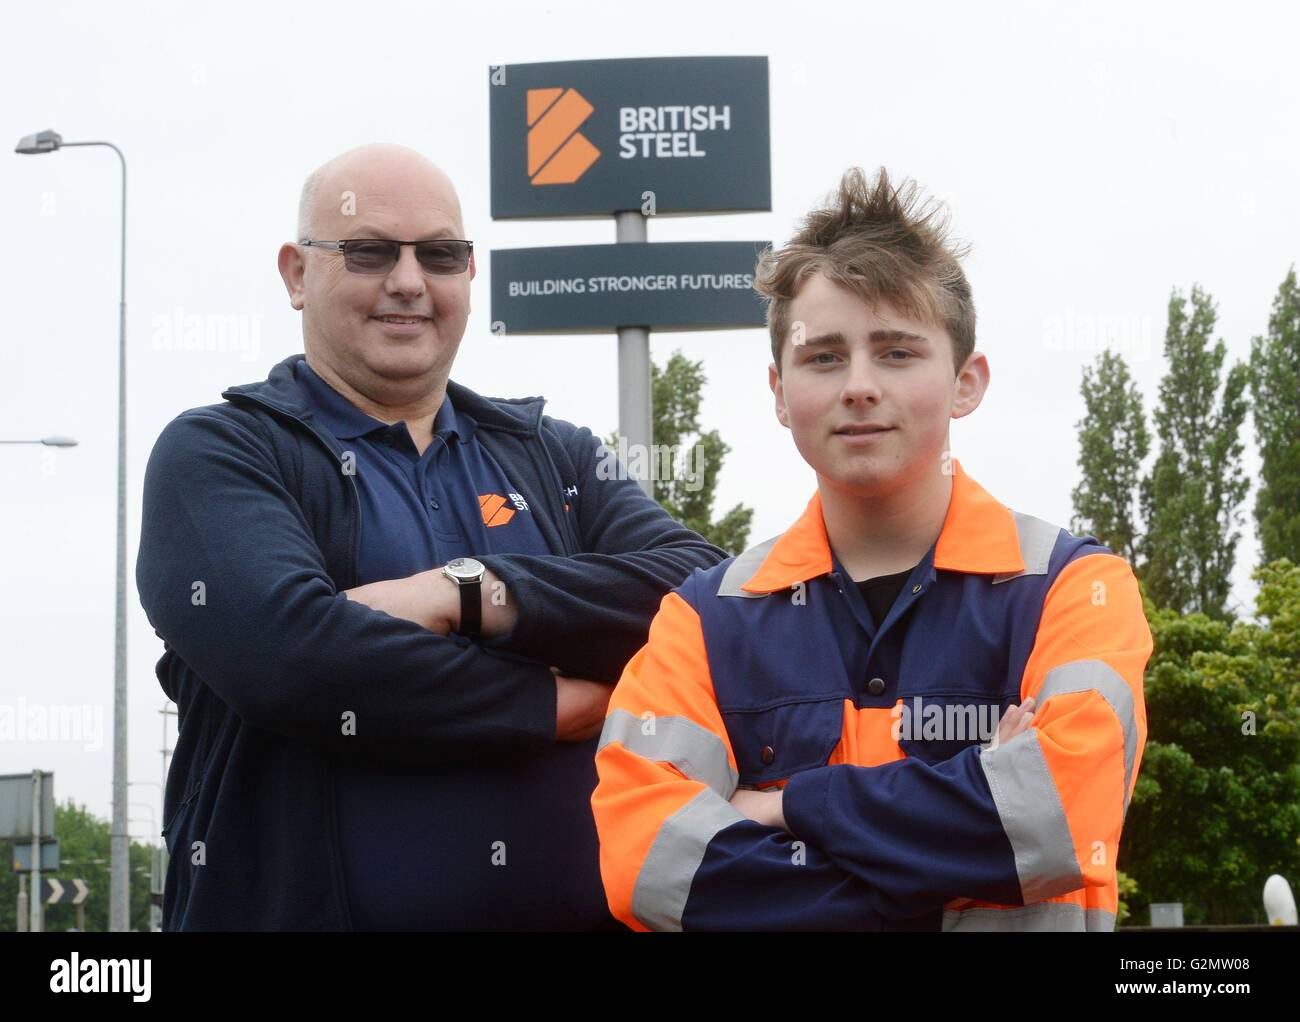 Chris Allison (left), who has worked at the steelworks plant in Scunthorpe for over 40 years, and apprentice Ben Manoury stand in front of the new British Steel sign at the entrance to the plant, as unions have welcomed the return of the brand after the completion of the sale of part of Tata Steel. Stock Photo